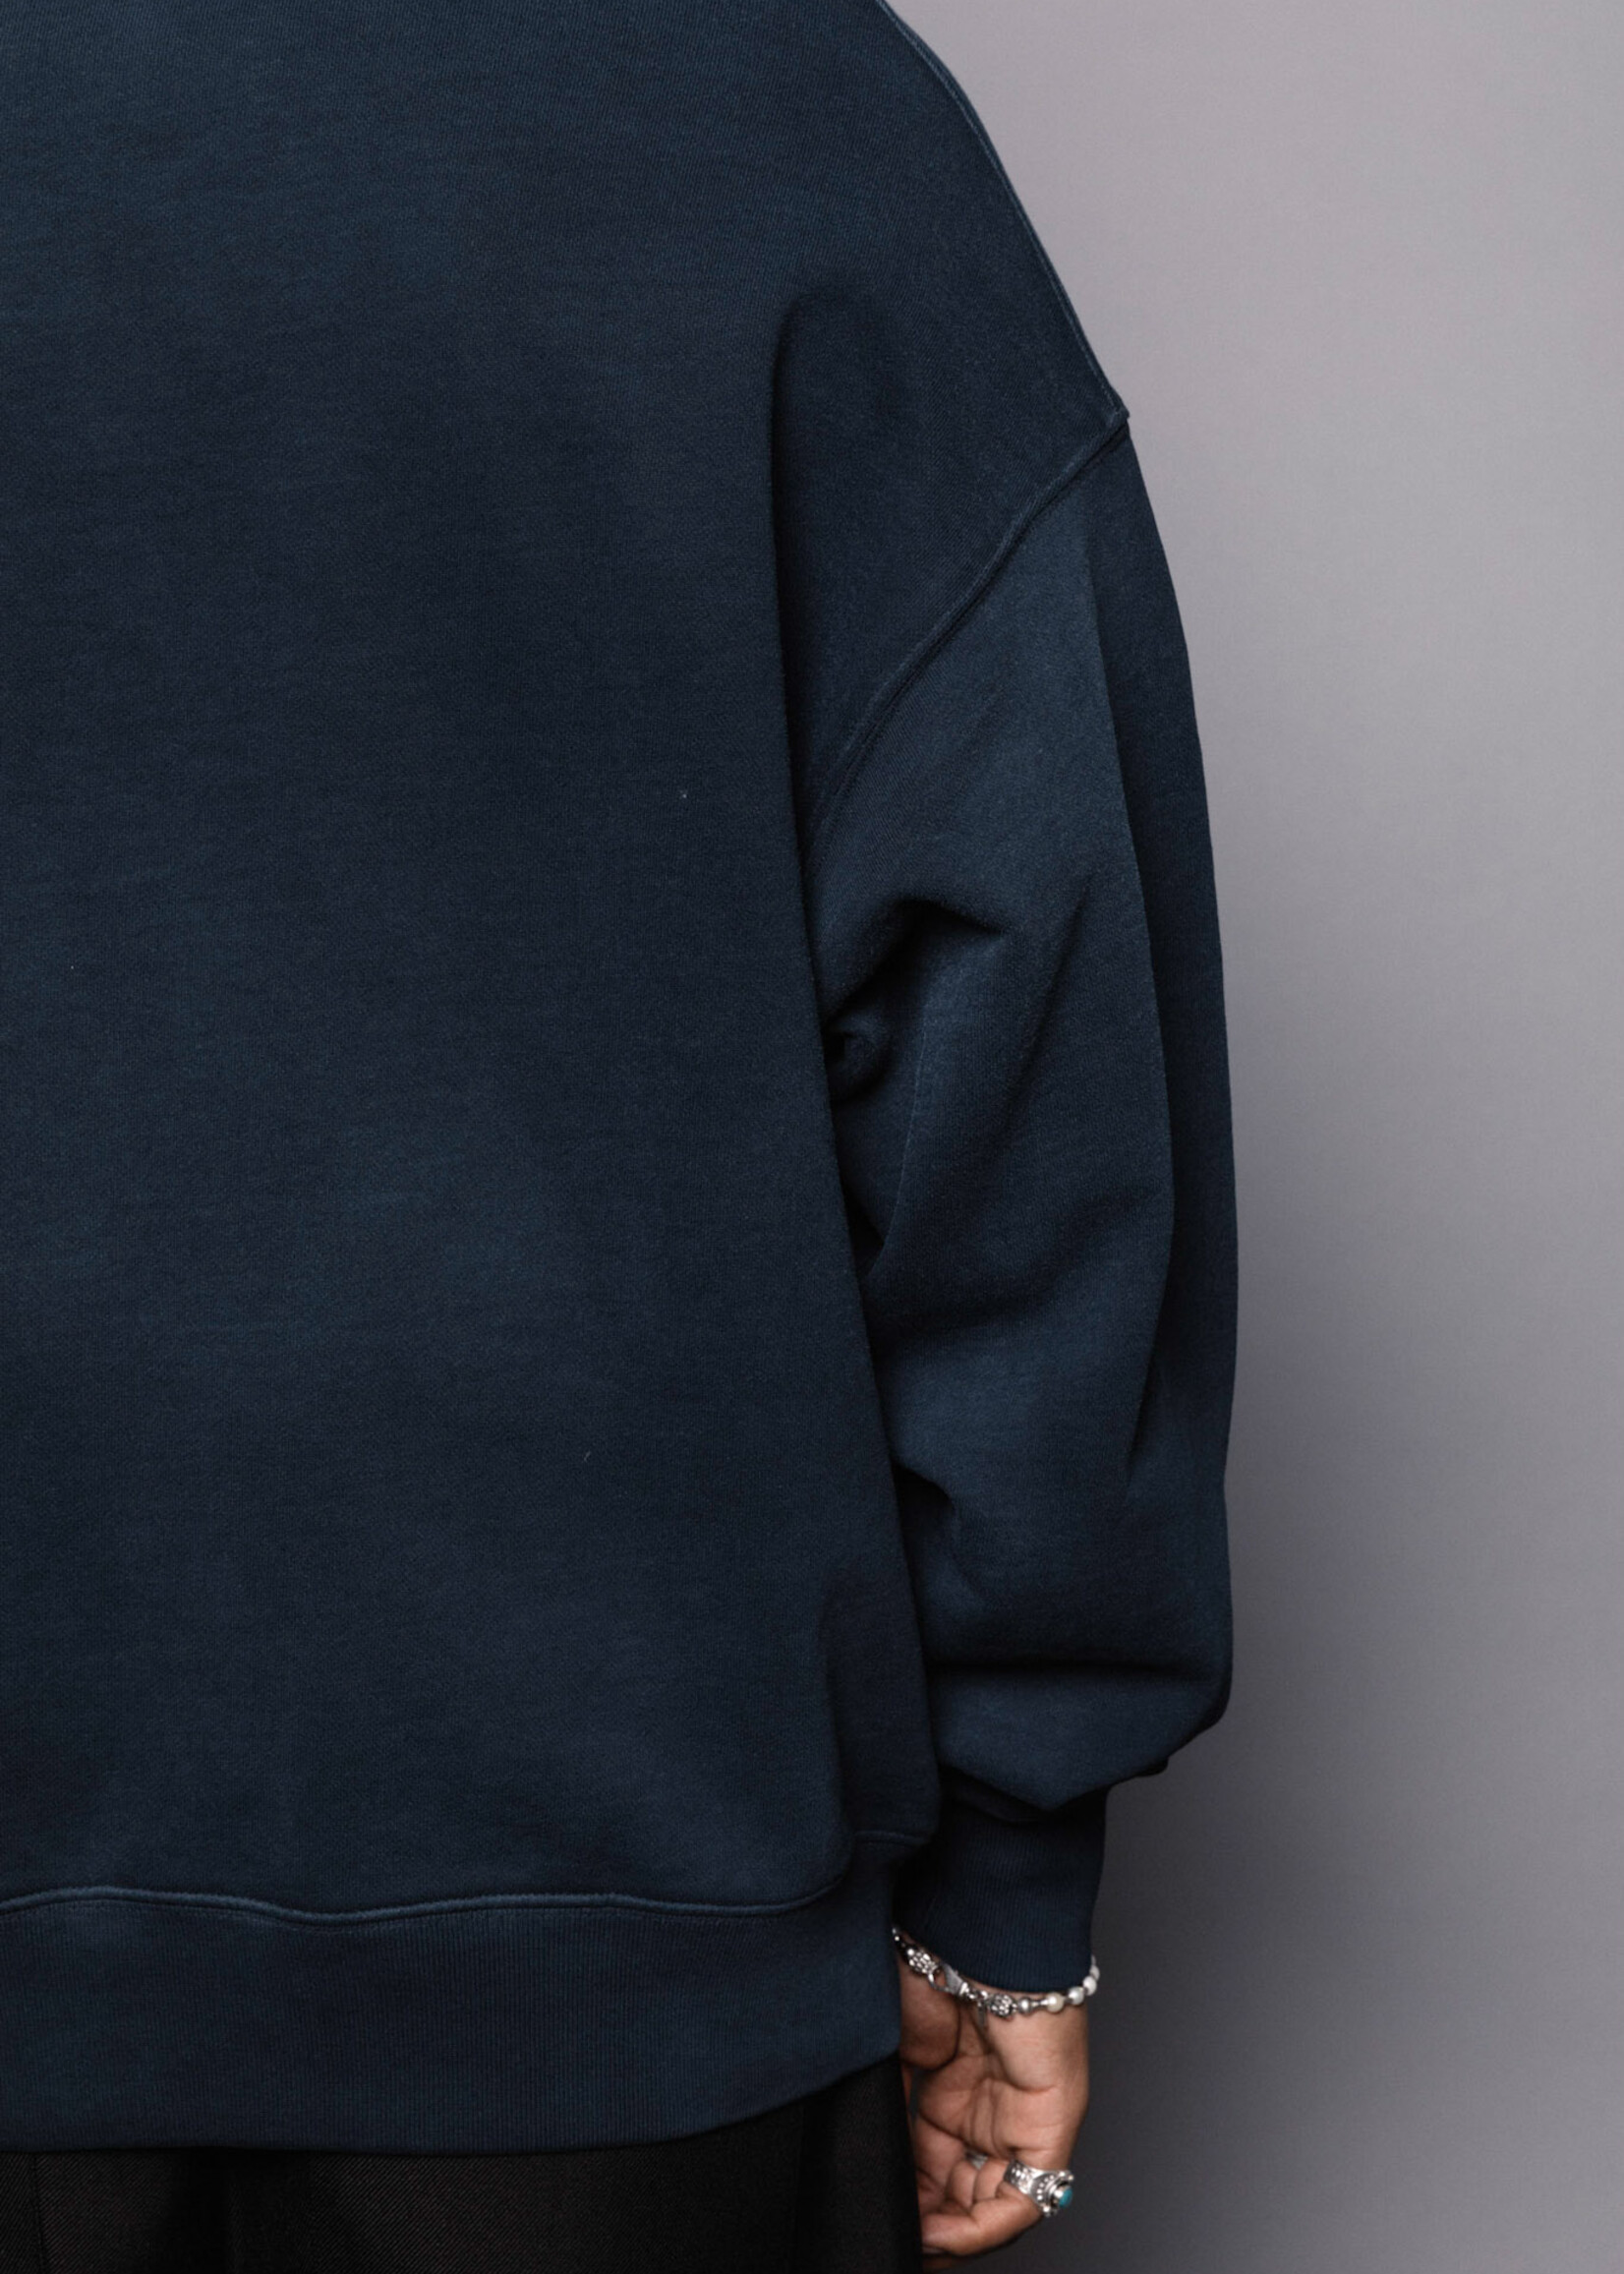 WILLY CHAVARRIA NOW or NEVER EXCLUSIVE: Mockneck Sweatshirt in Navy